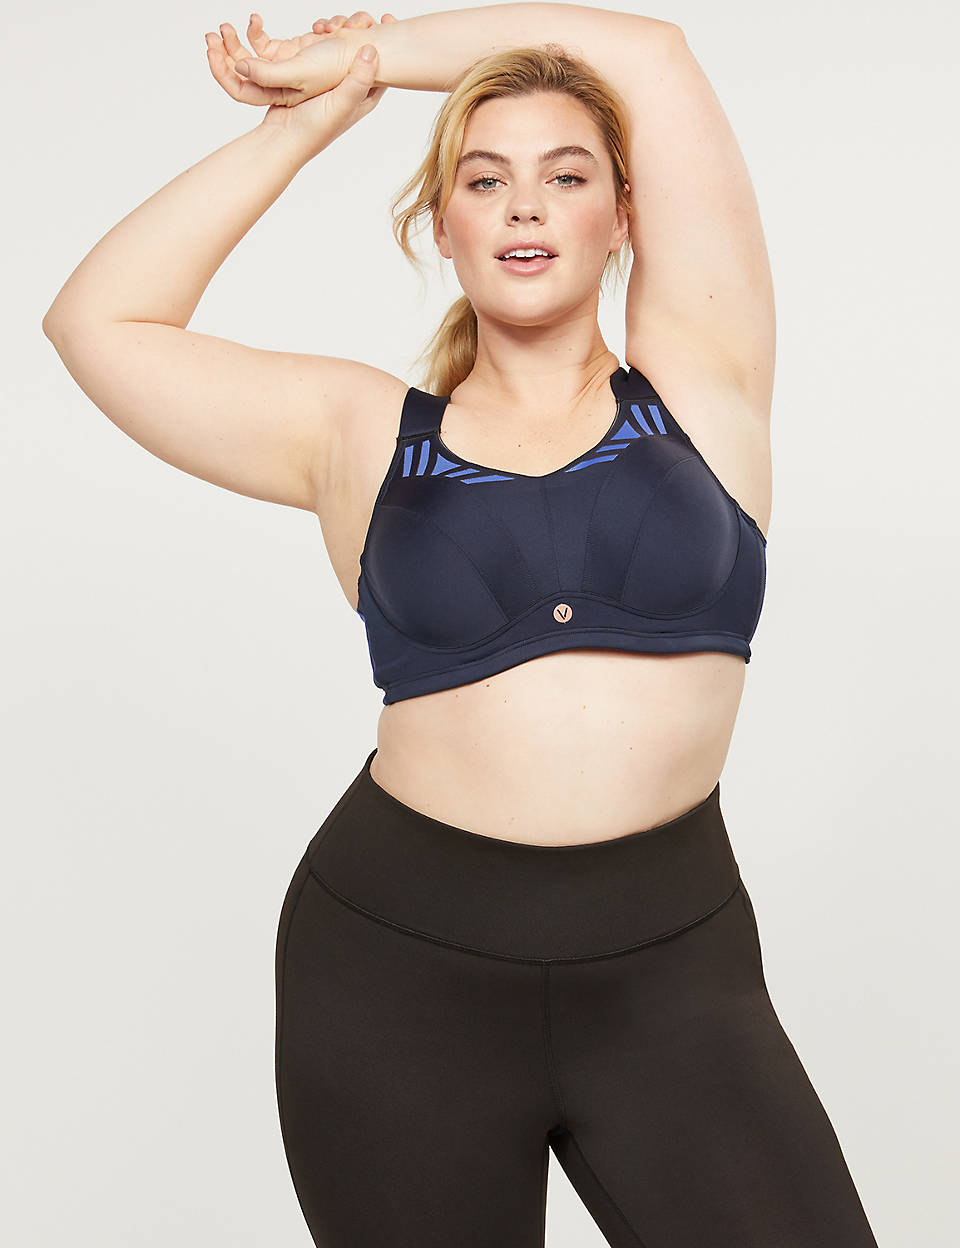 Supportive Plus-Size Sports Bras That Won't Chafe Or Dig